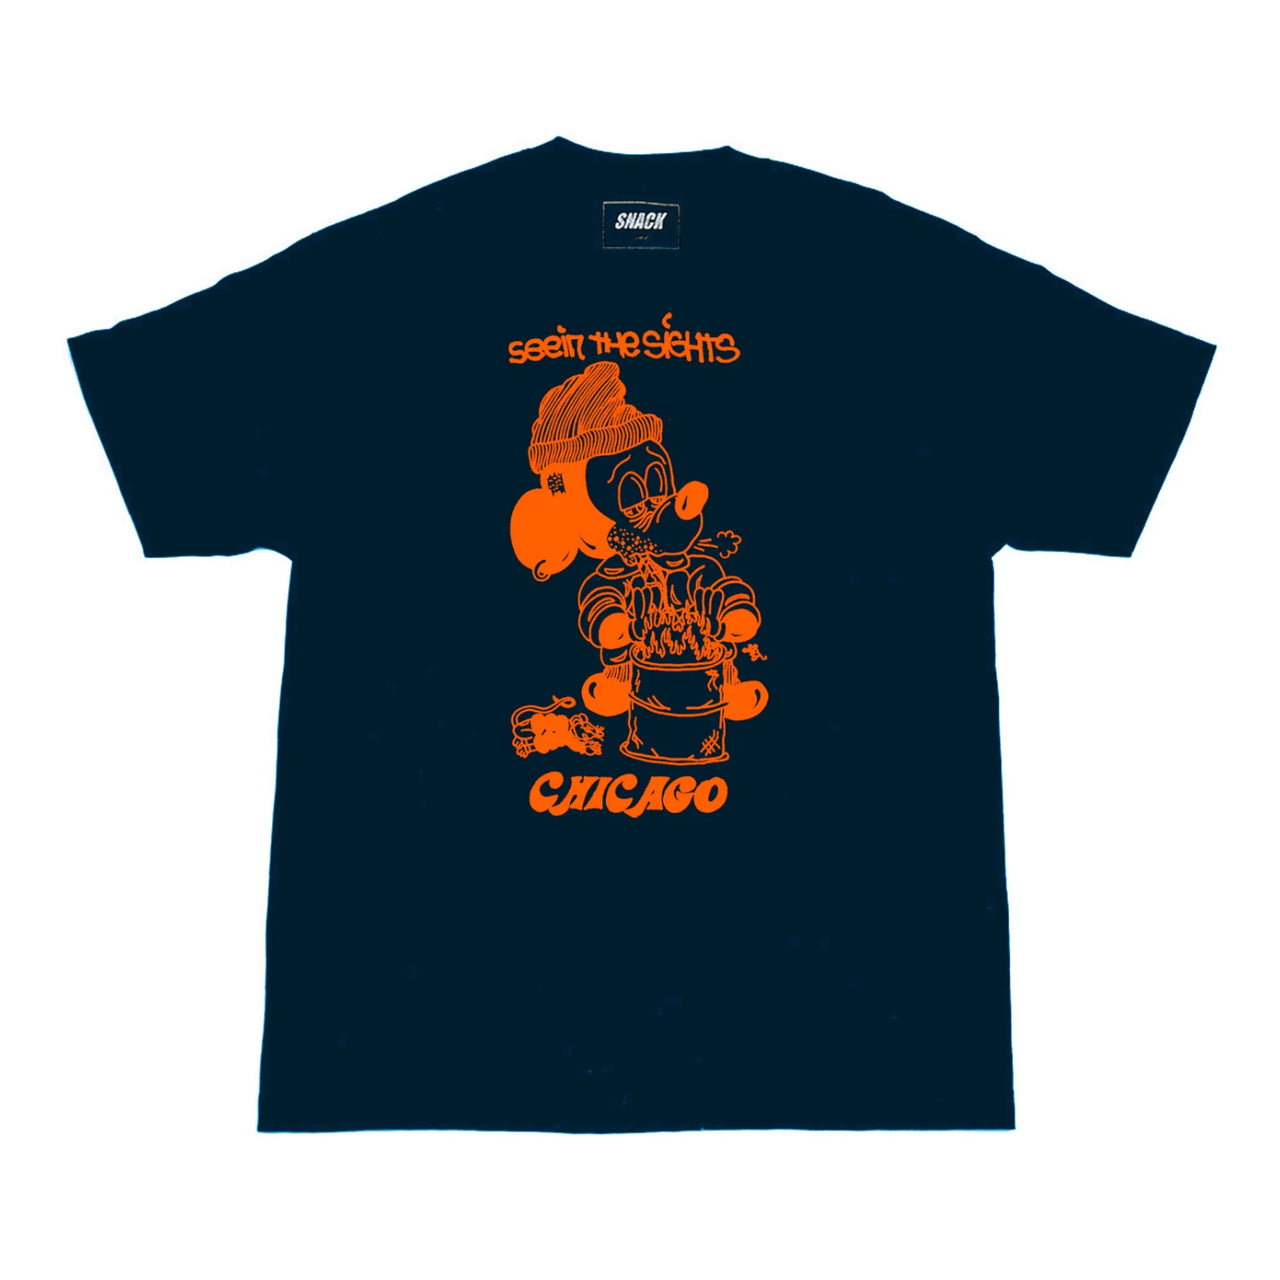 SNACK - SEEIN THE SIGHTS CHICAGO TEE - NAVY